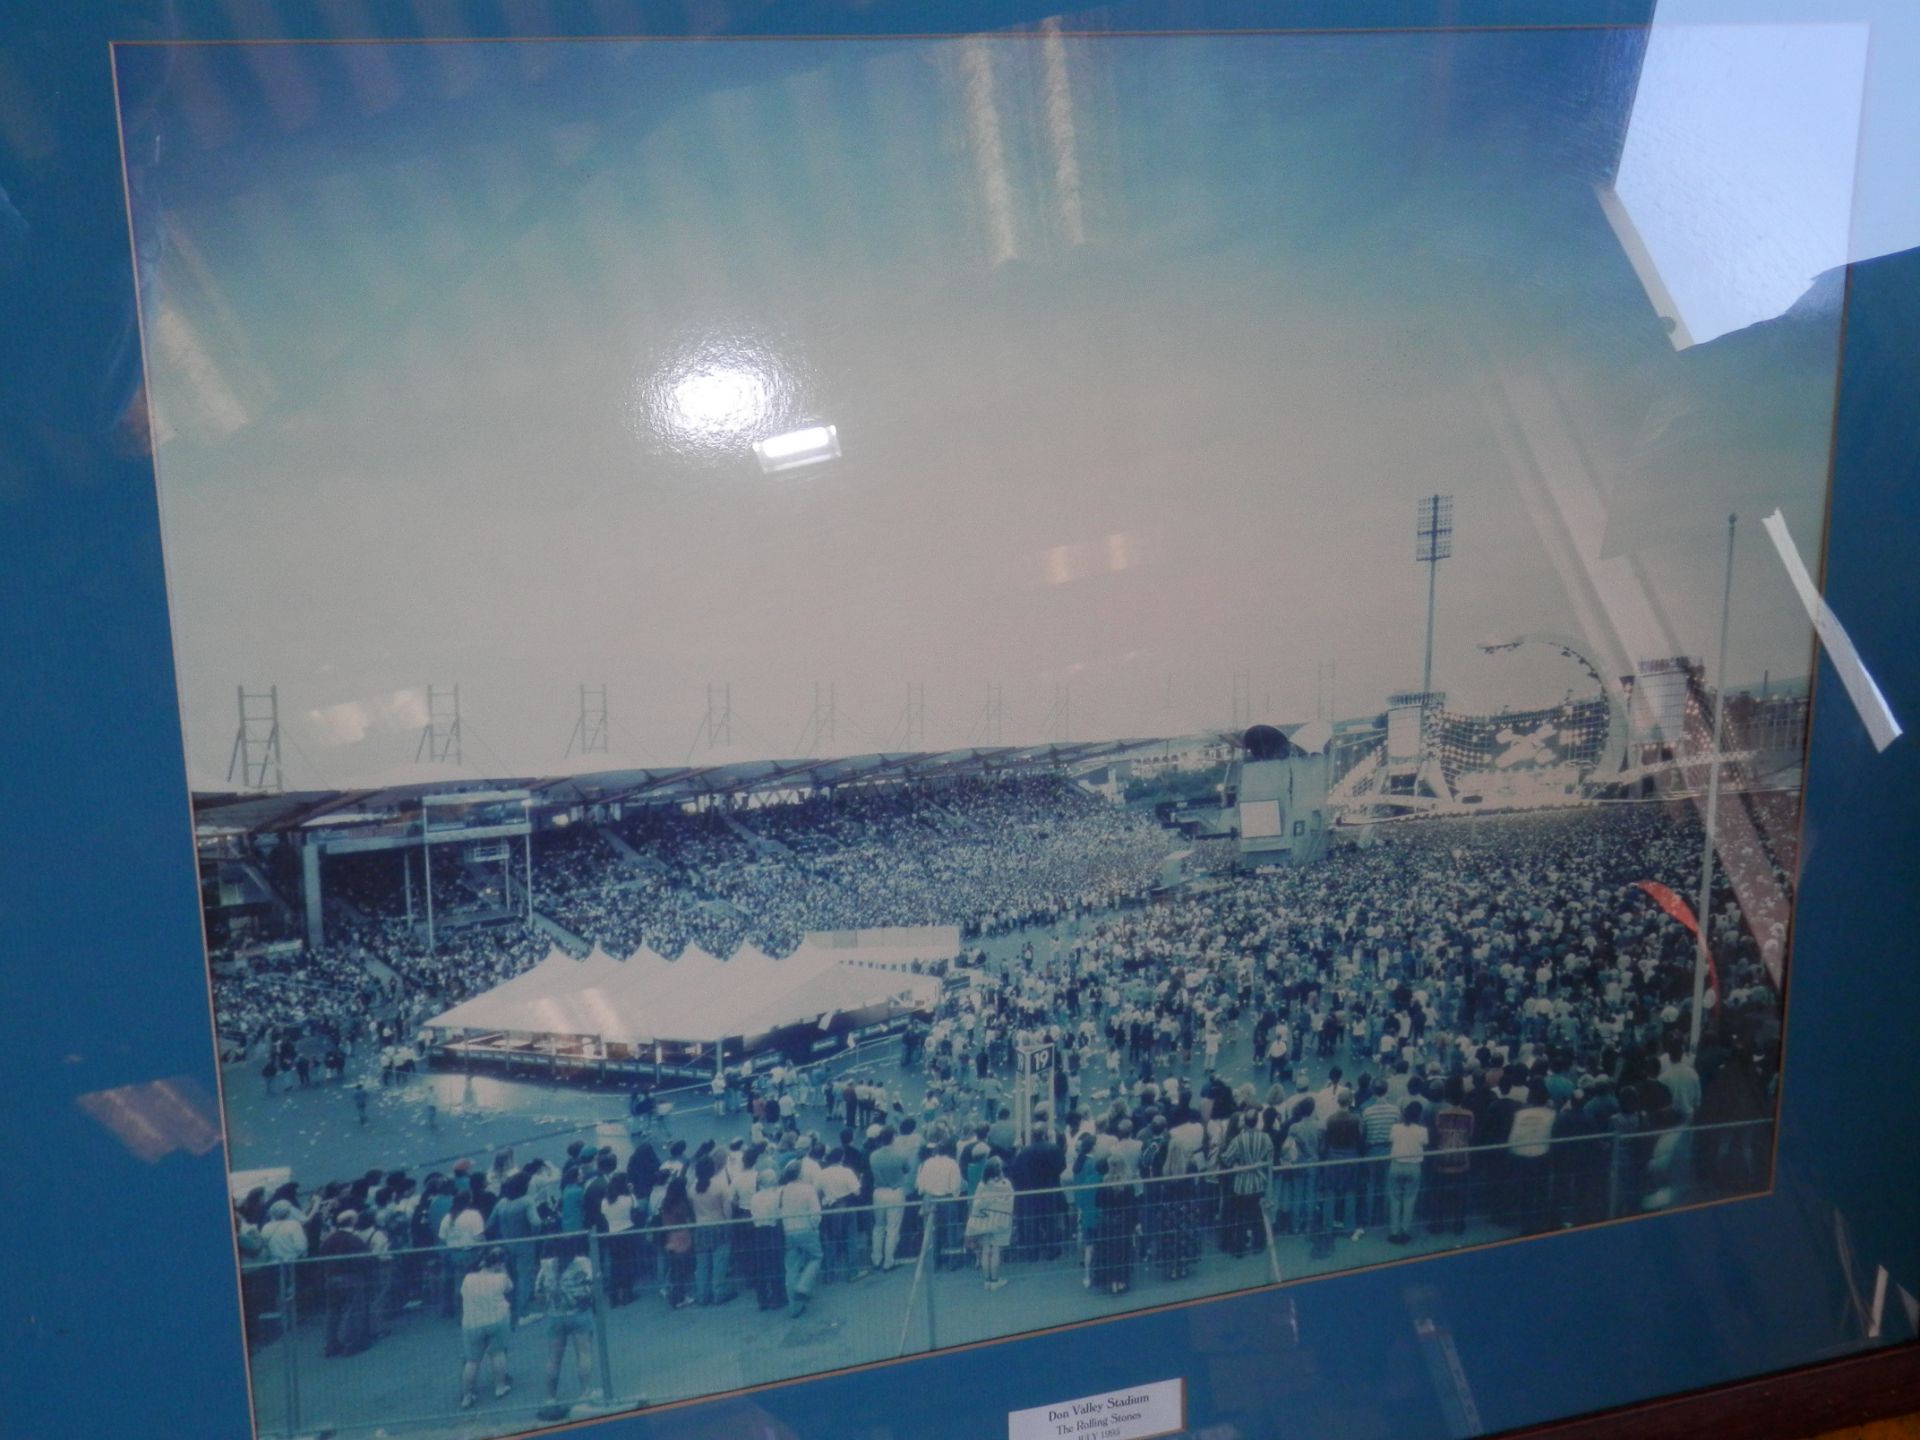 ORIGINAL ROLLING STONES PHOTOGRAPH THAT WAS HUNG IN THE DON VALLEY STADIUM CORRIDOR FROM 1995 - Image 2 of 3